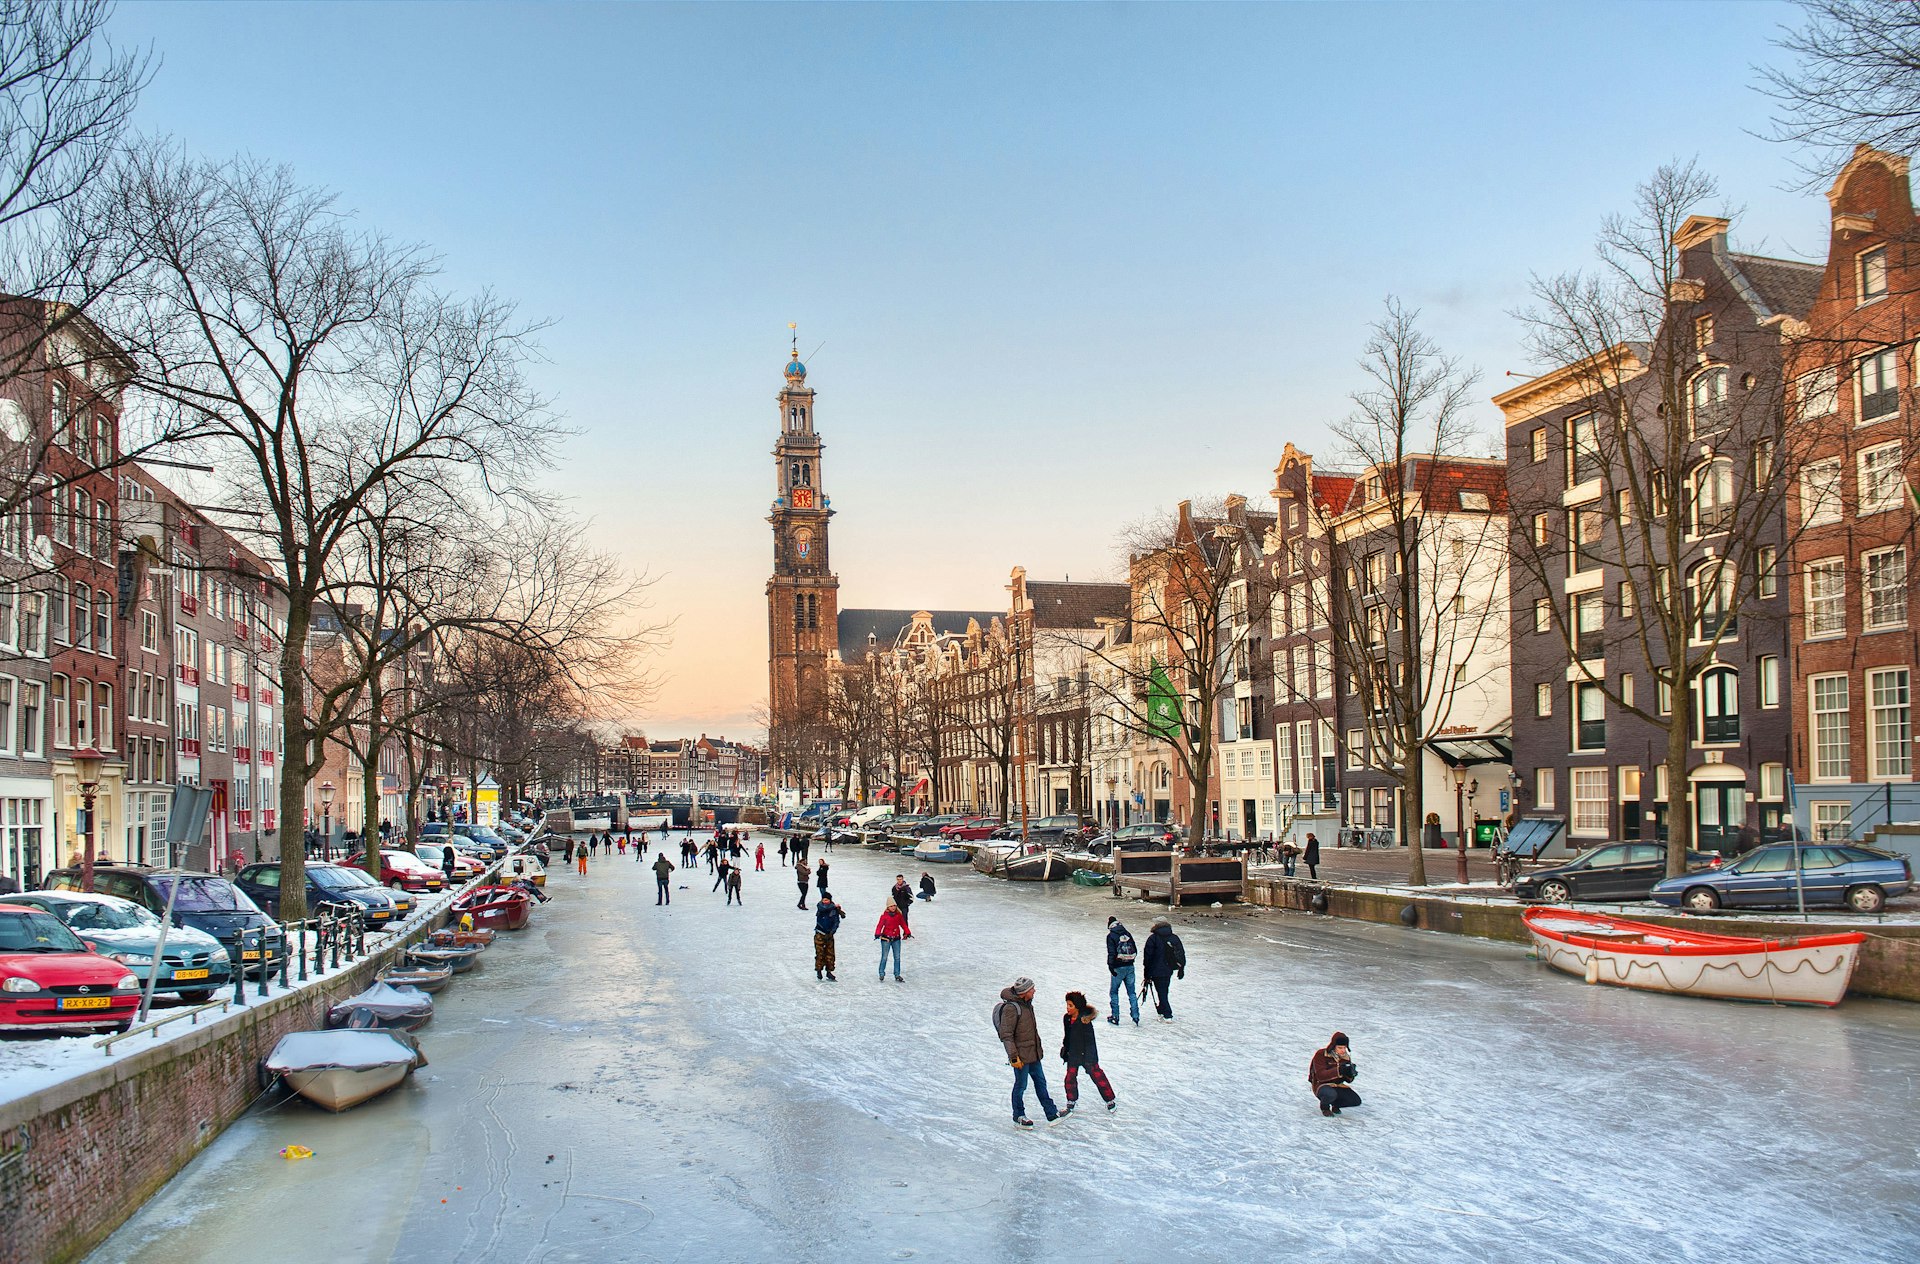 Skaters on the iced-over canals of Amsterdam, the Netherlands